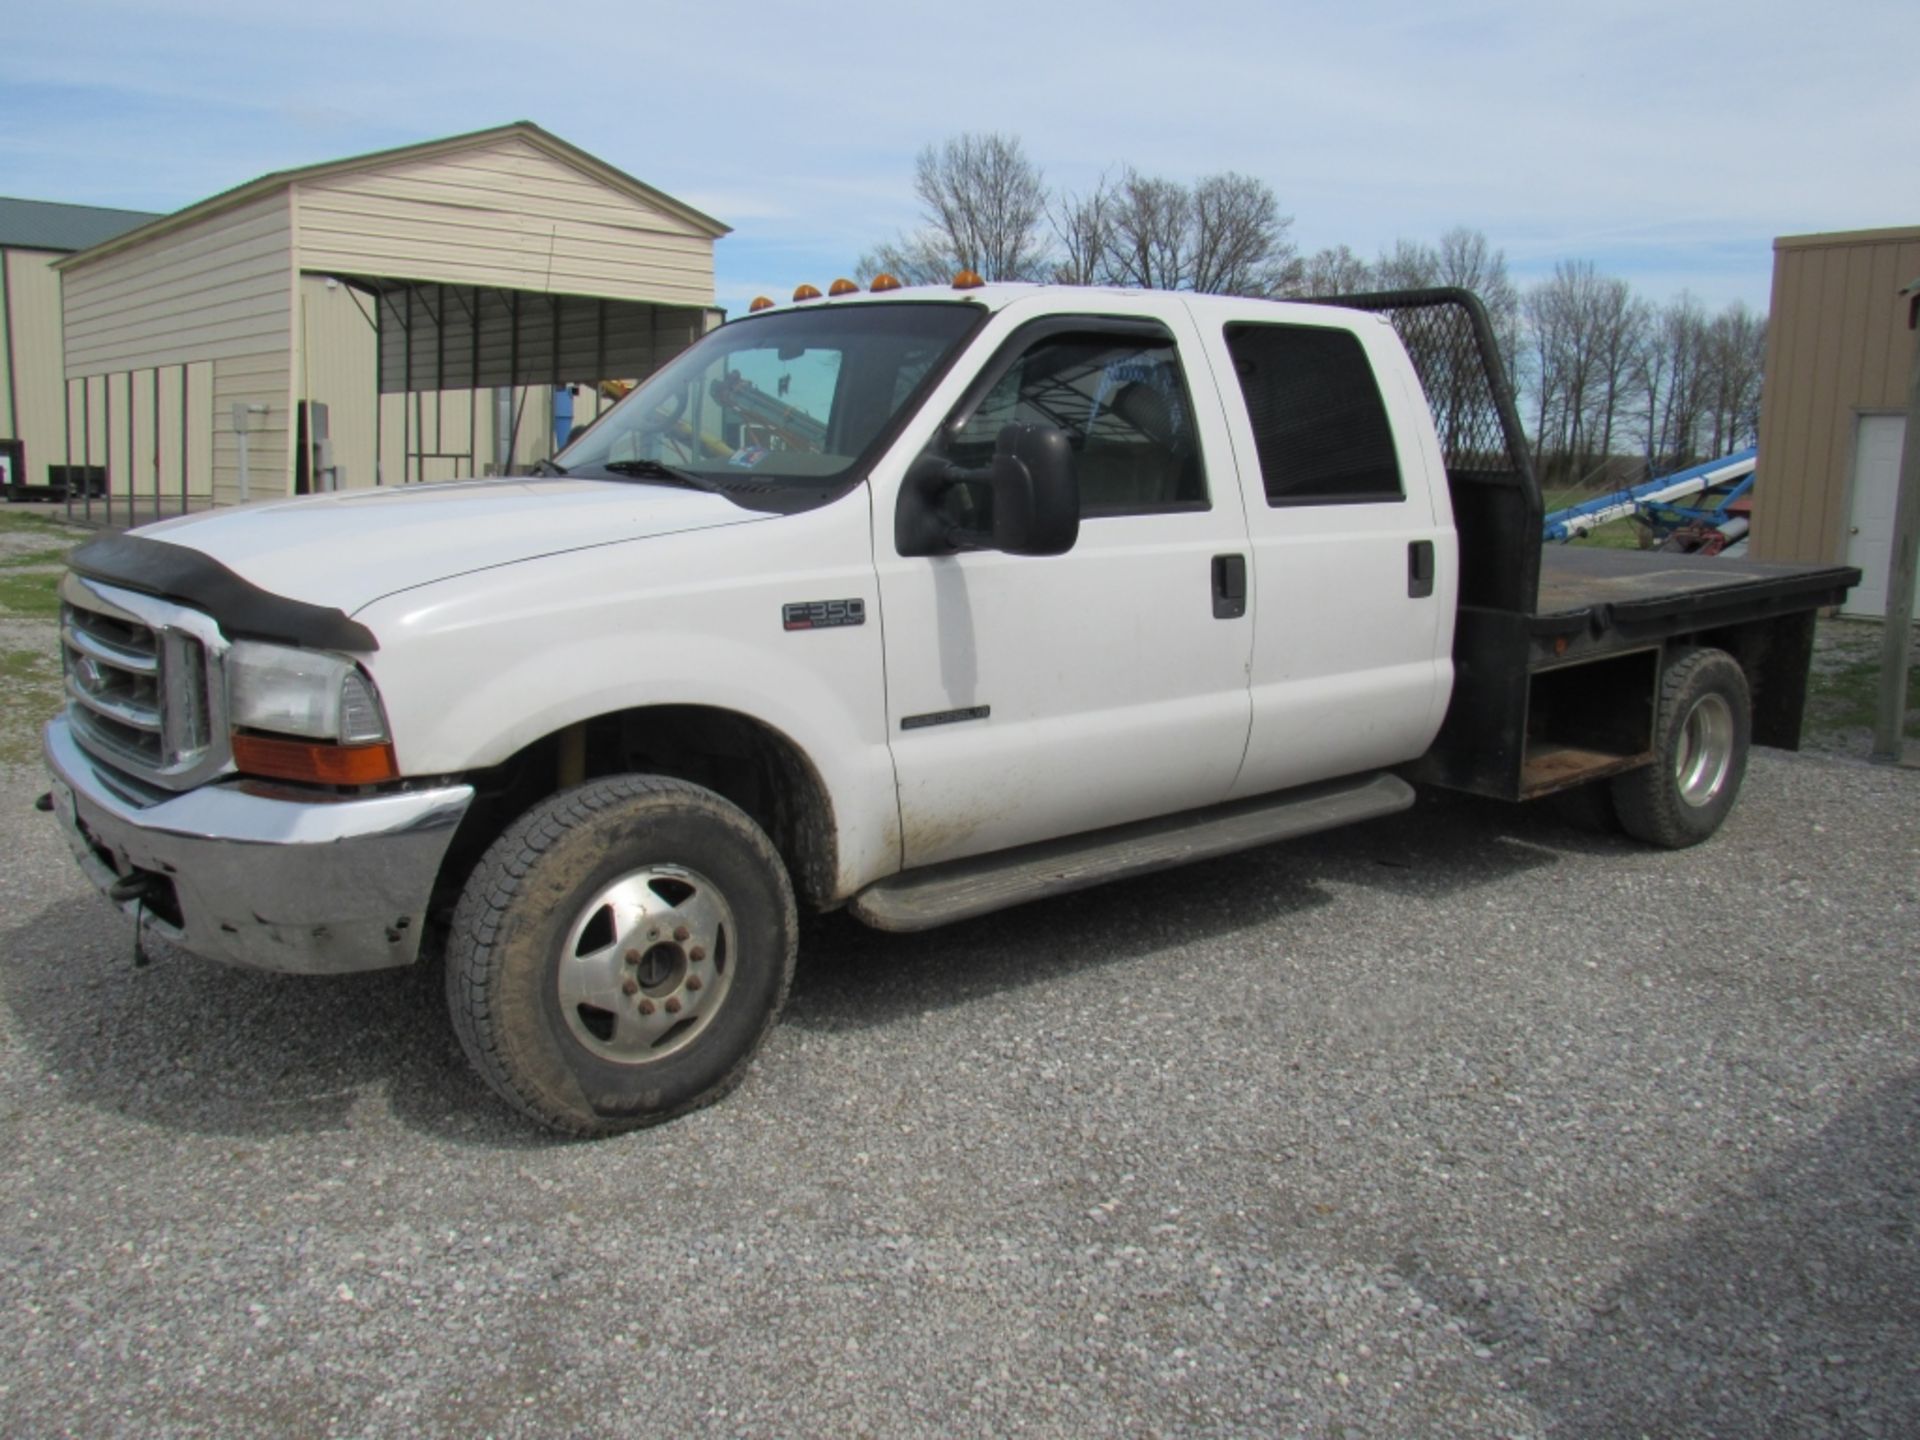 2001 Ford F350 Lariat Flatbed 4wd 7.3 L Powerstroke Diesel Engine - Image 2 of 21